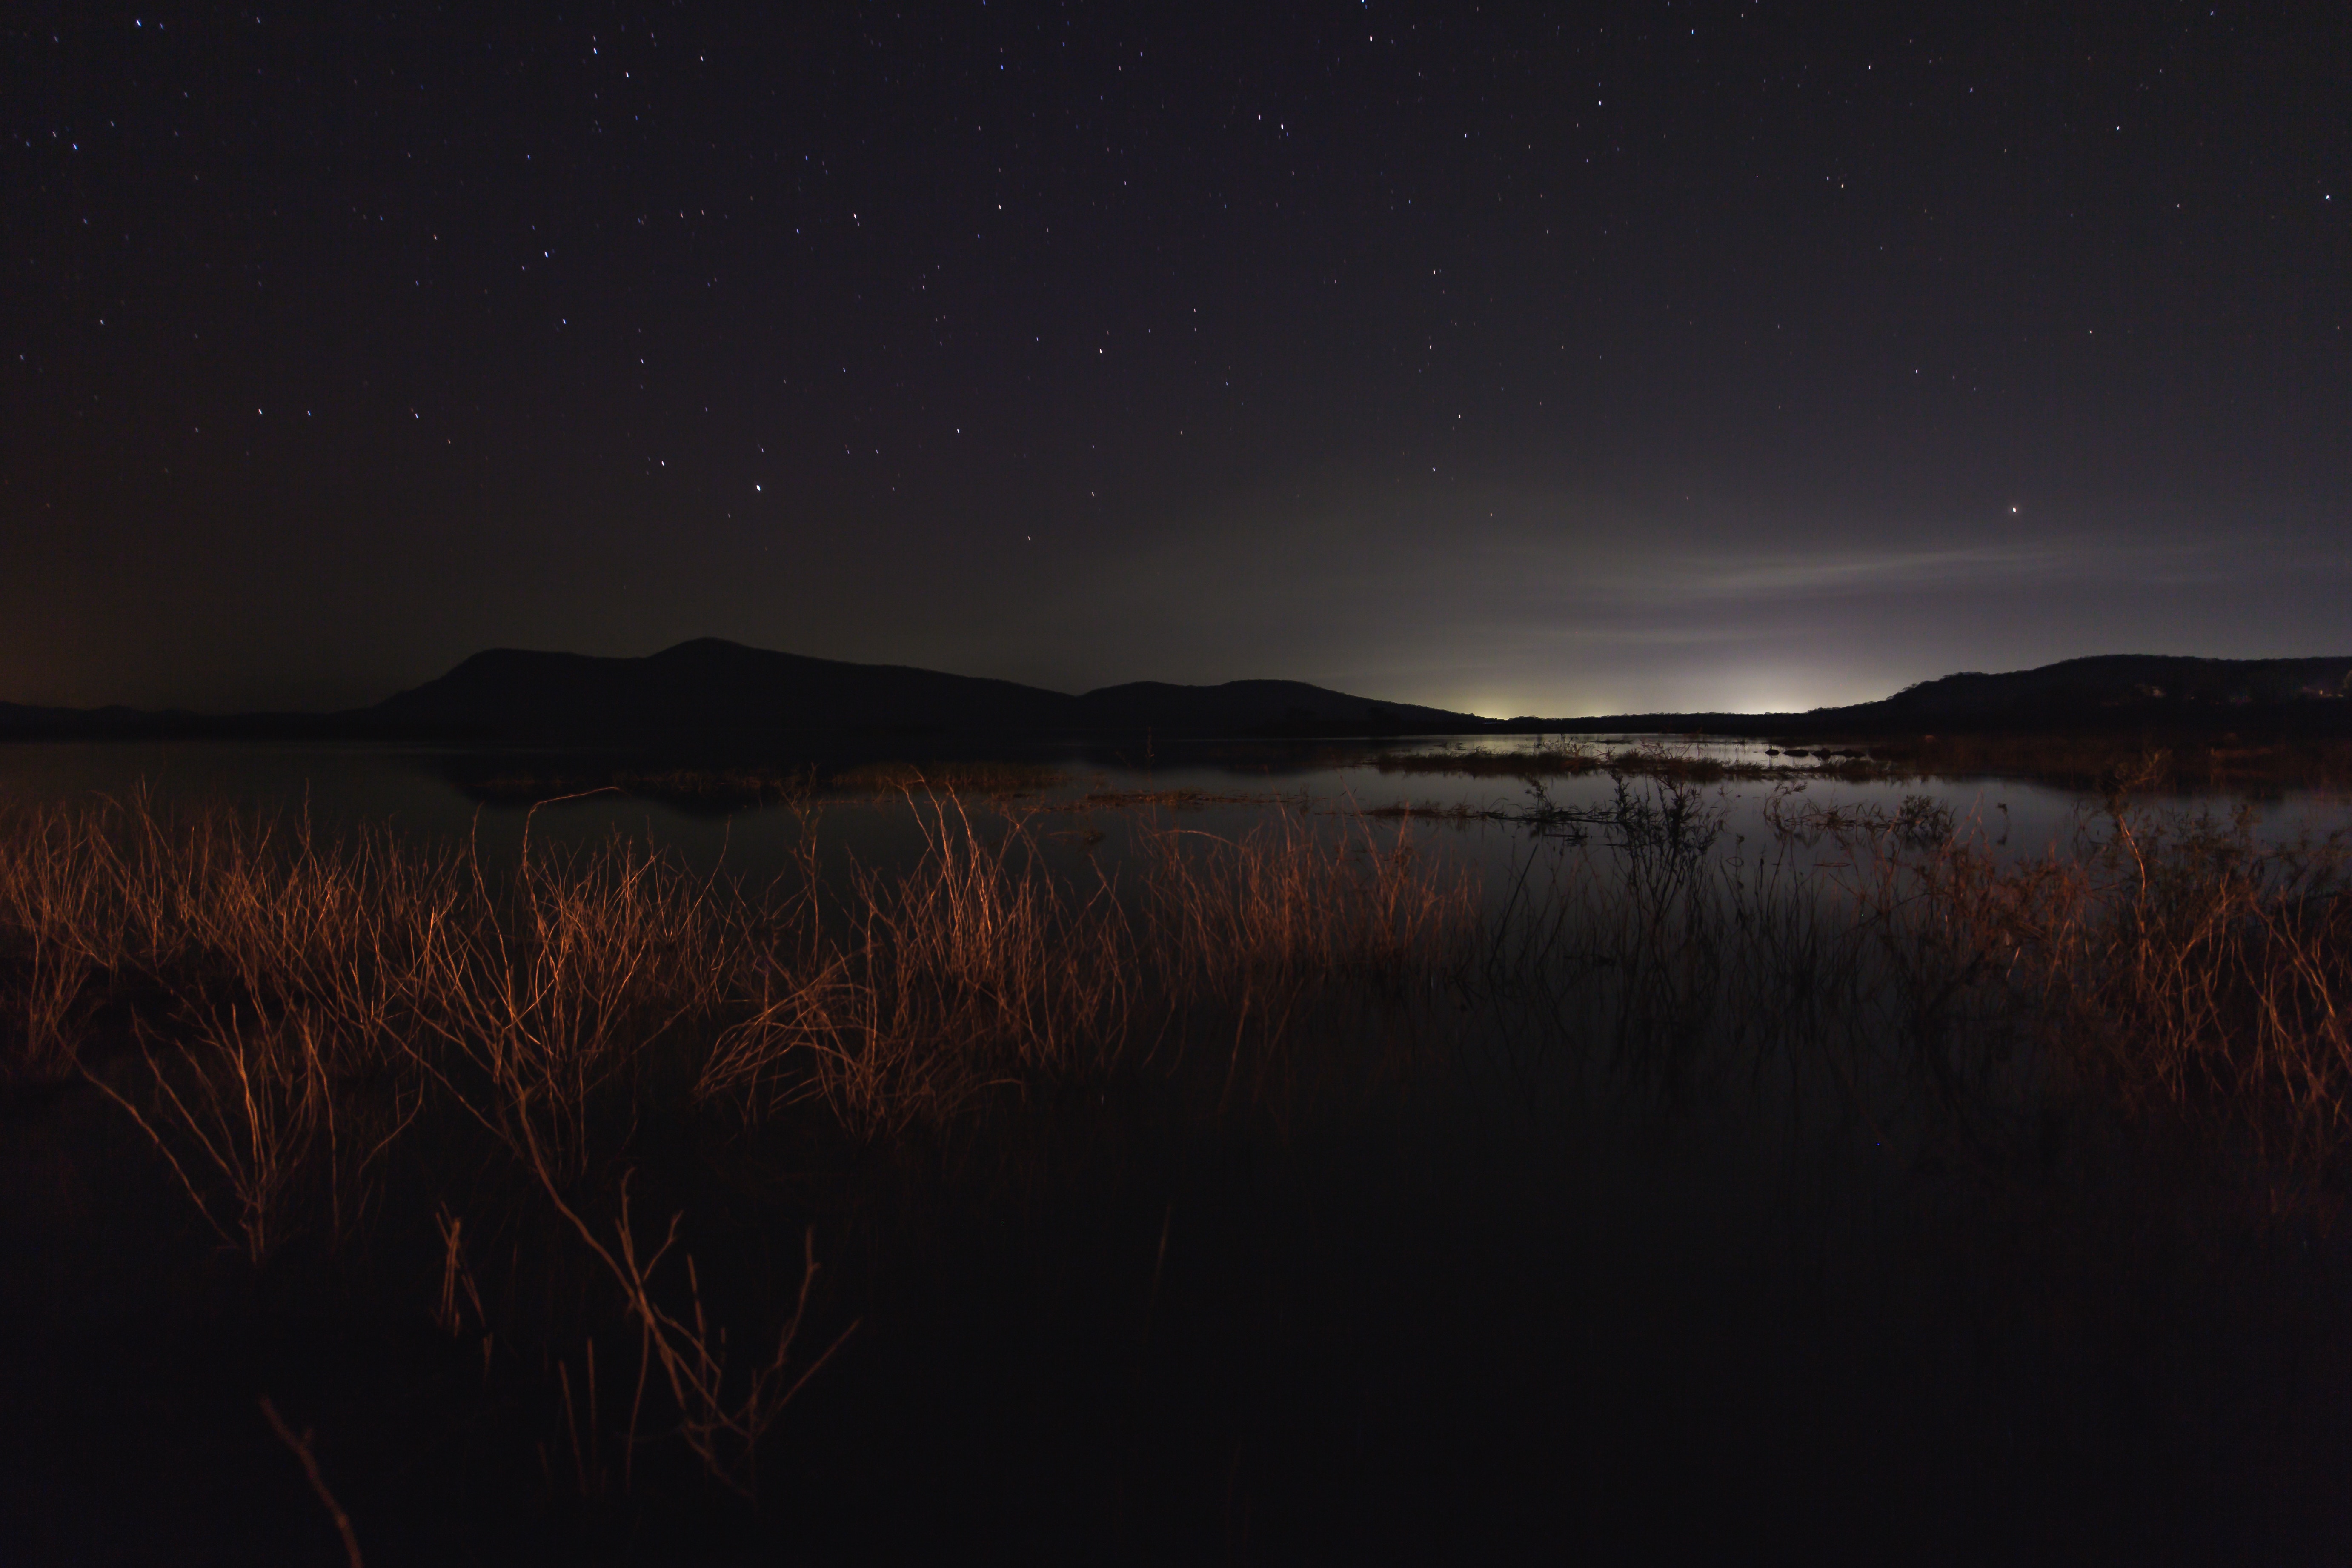 141842 download wallpaper dark, grass, night, lake, starry sky, darkness screensavers and pictures for free